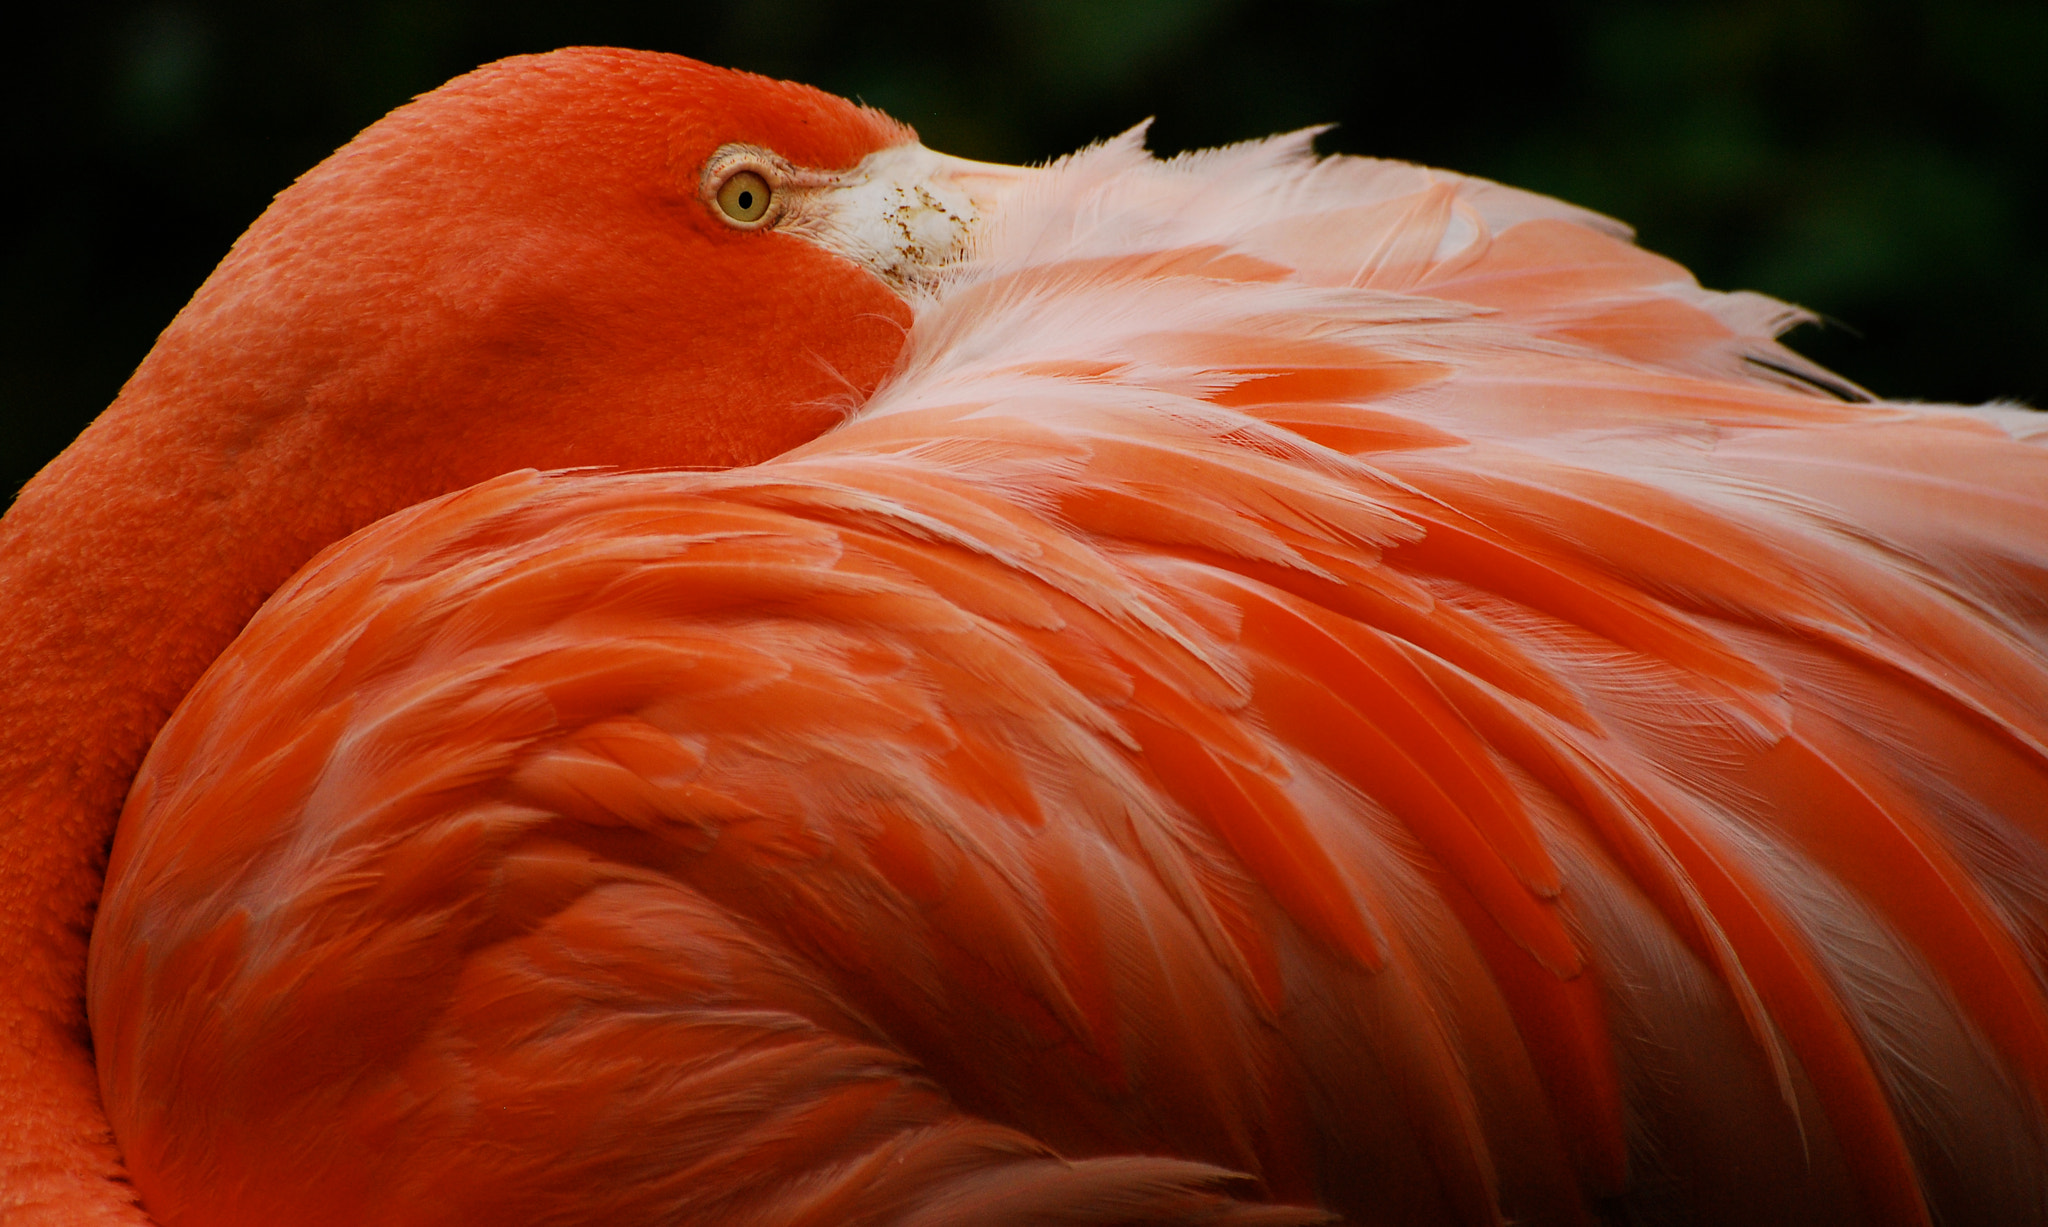 Nikon D80 + Nikon AF-S Nikkor 70-300mm F4.5-5.6G VR sample photo. Pink flamingo at bronx zoo, new york . hand held, no filters. just cropped a bit. all natural photography